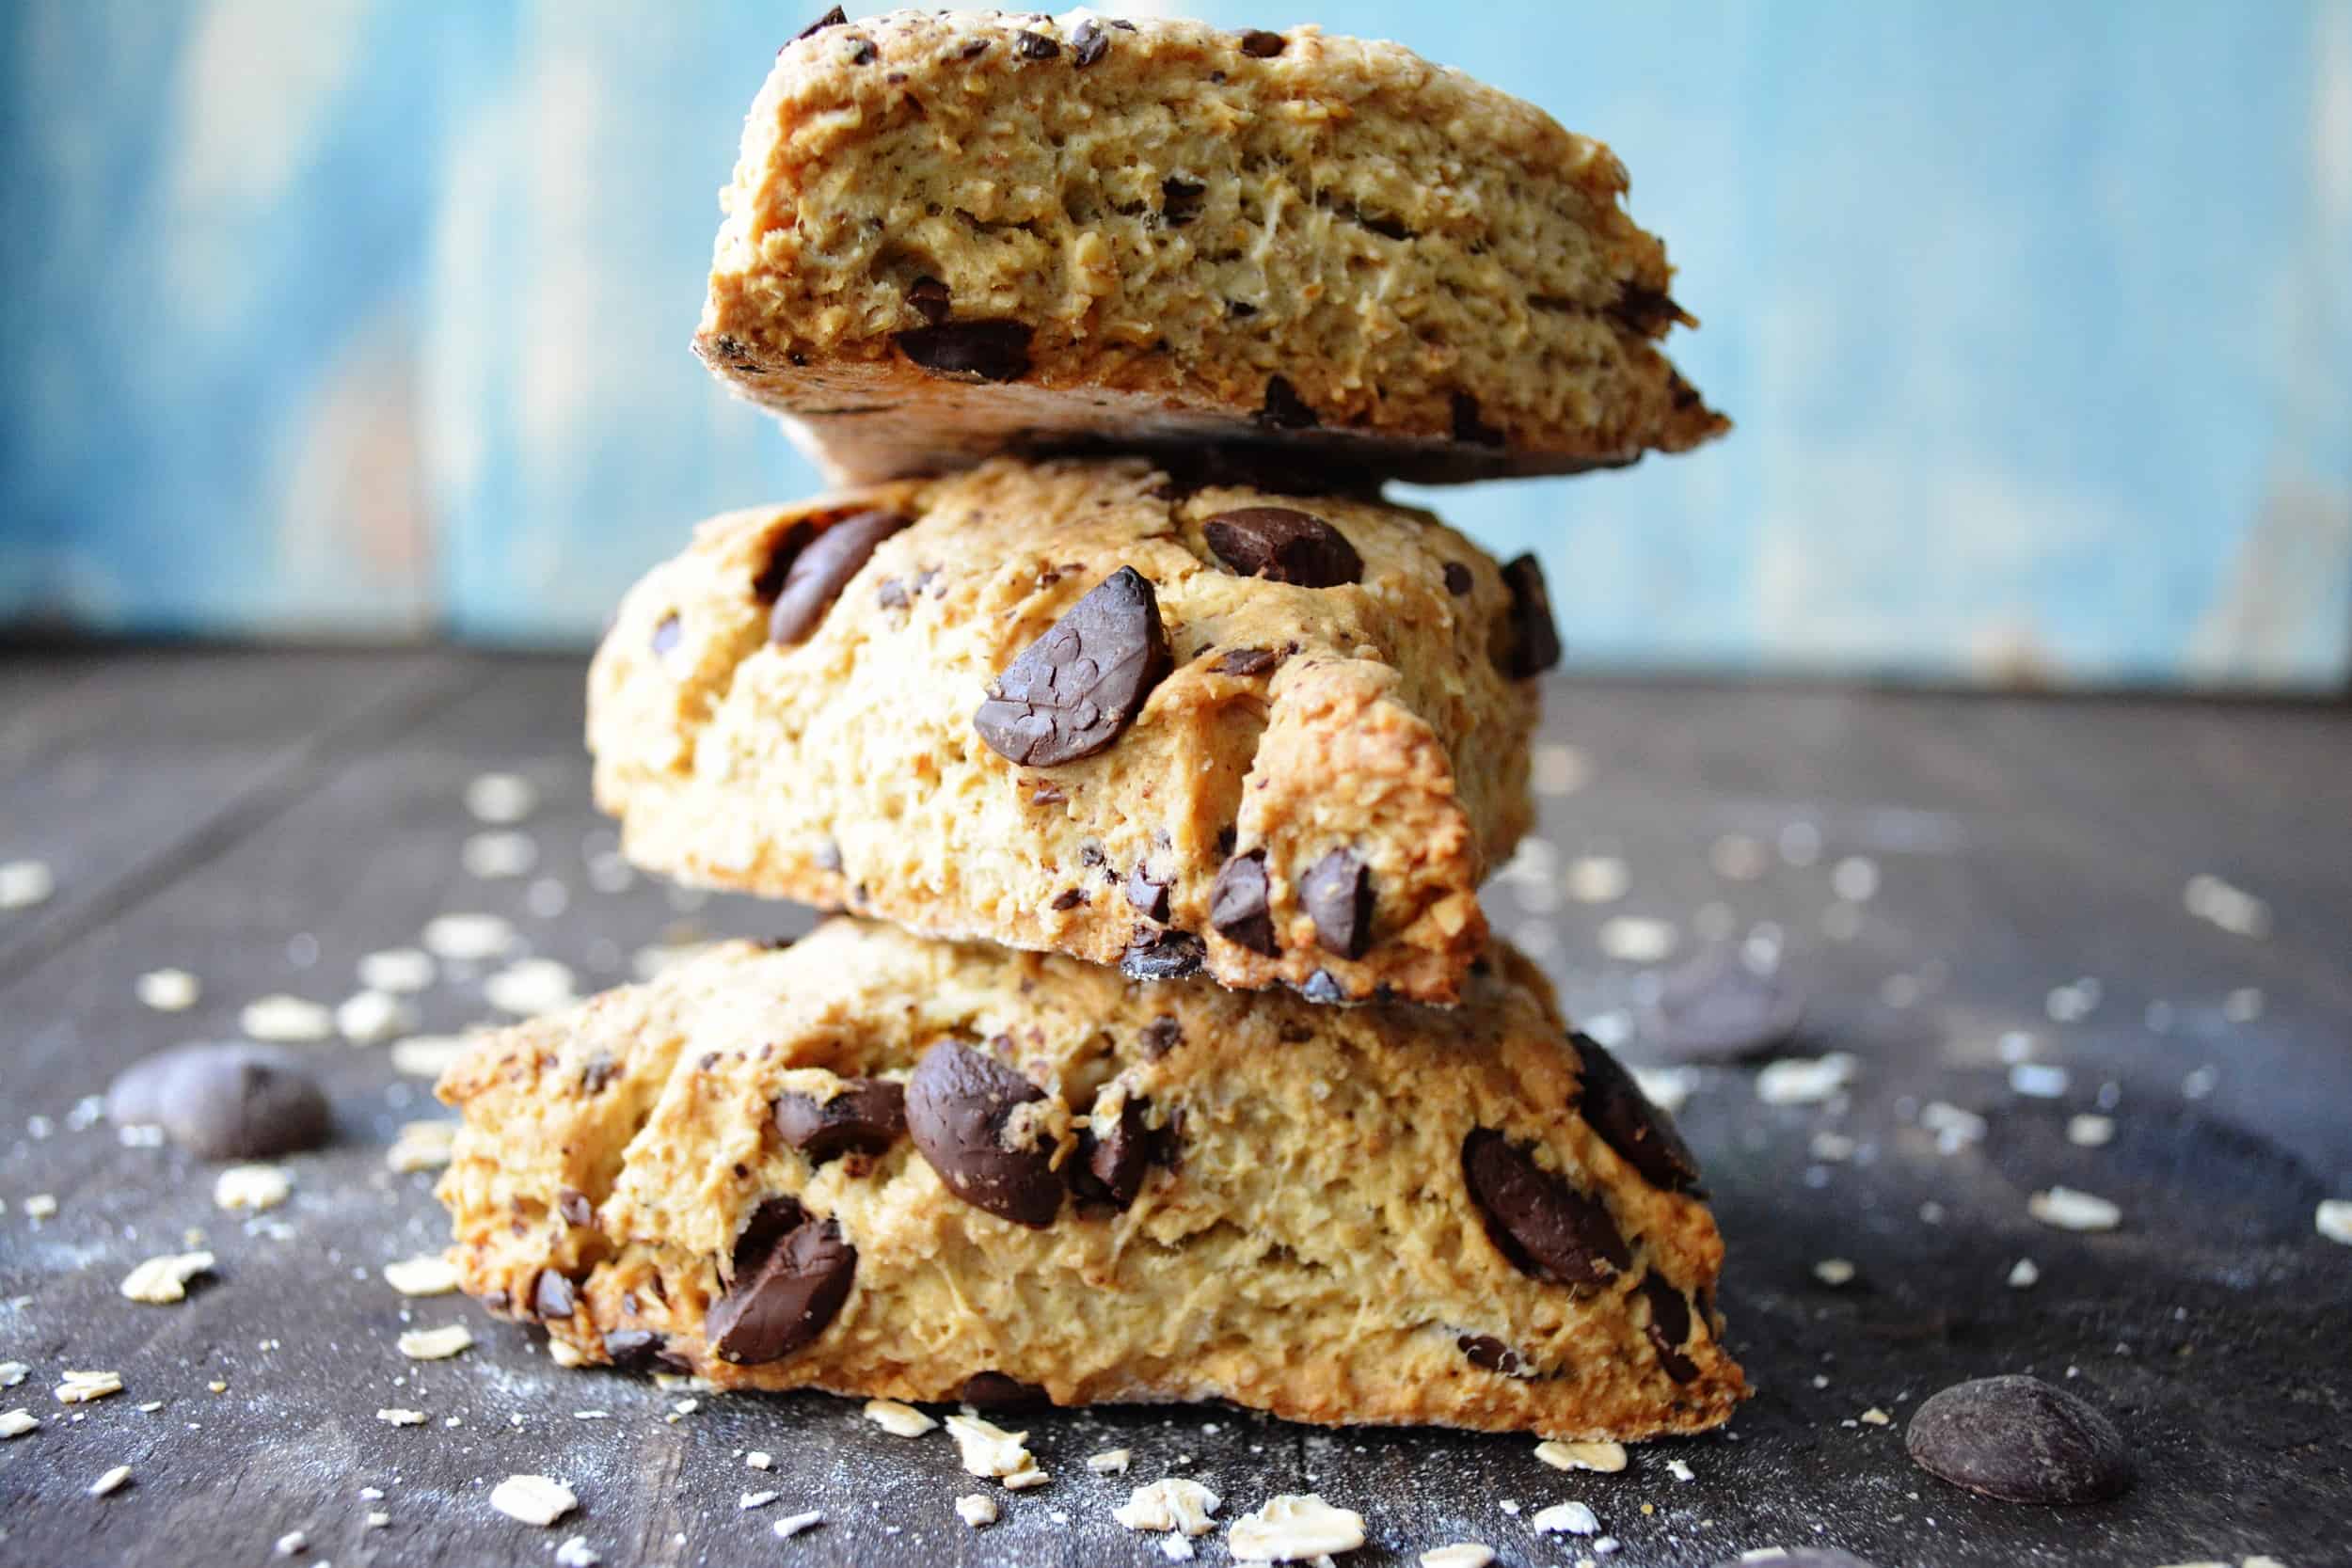 Toasted Oat and Chocolate Scones